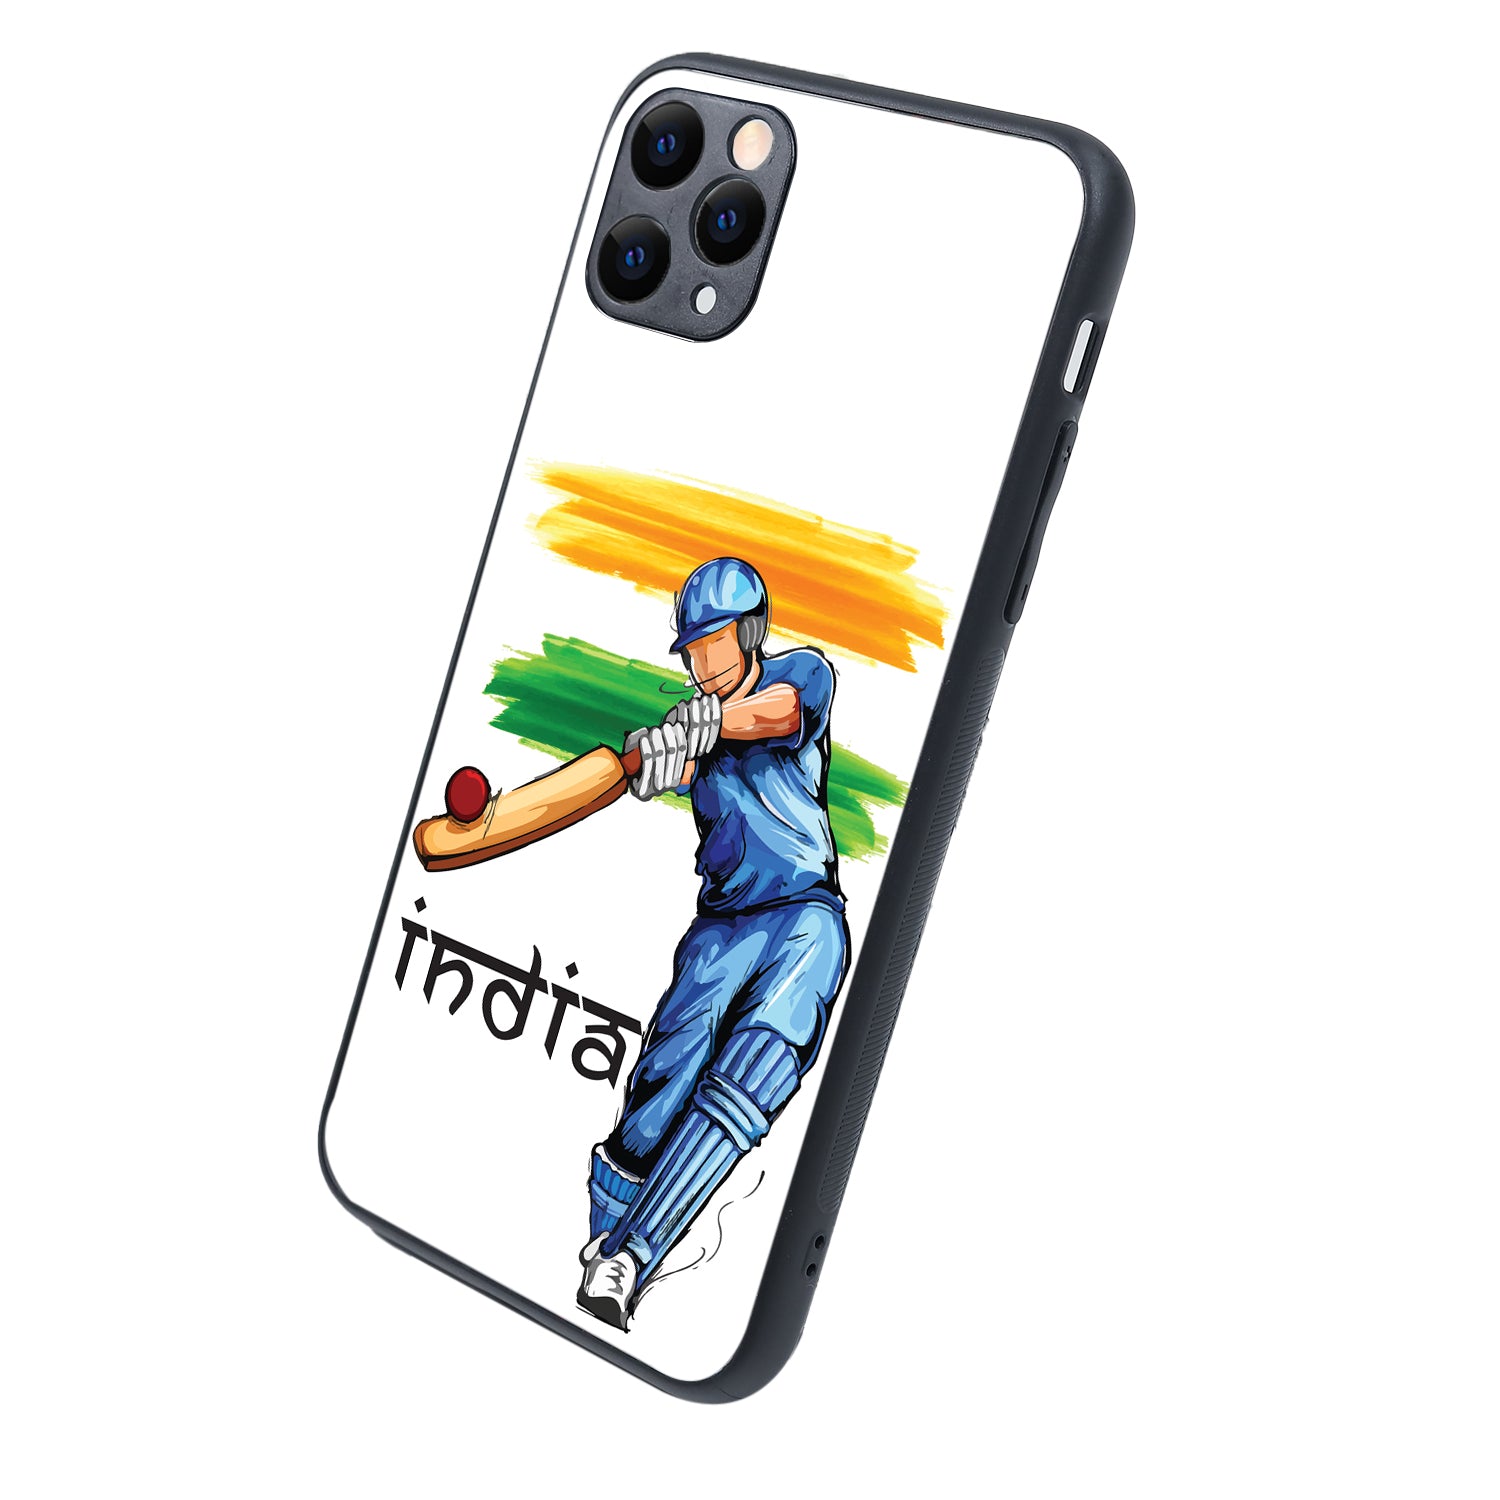 Indian Bold iPhone 11 Pro Max Case